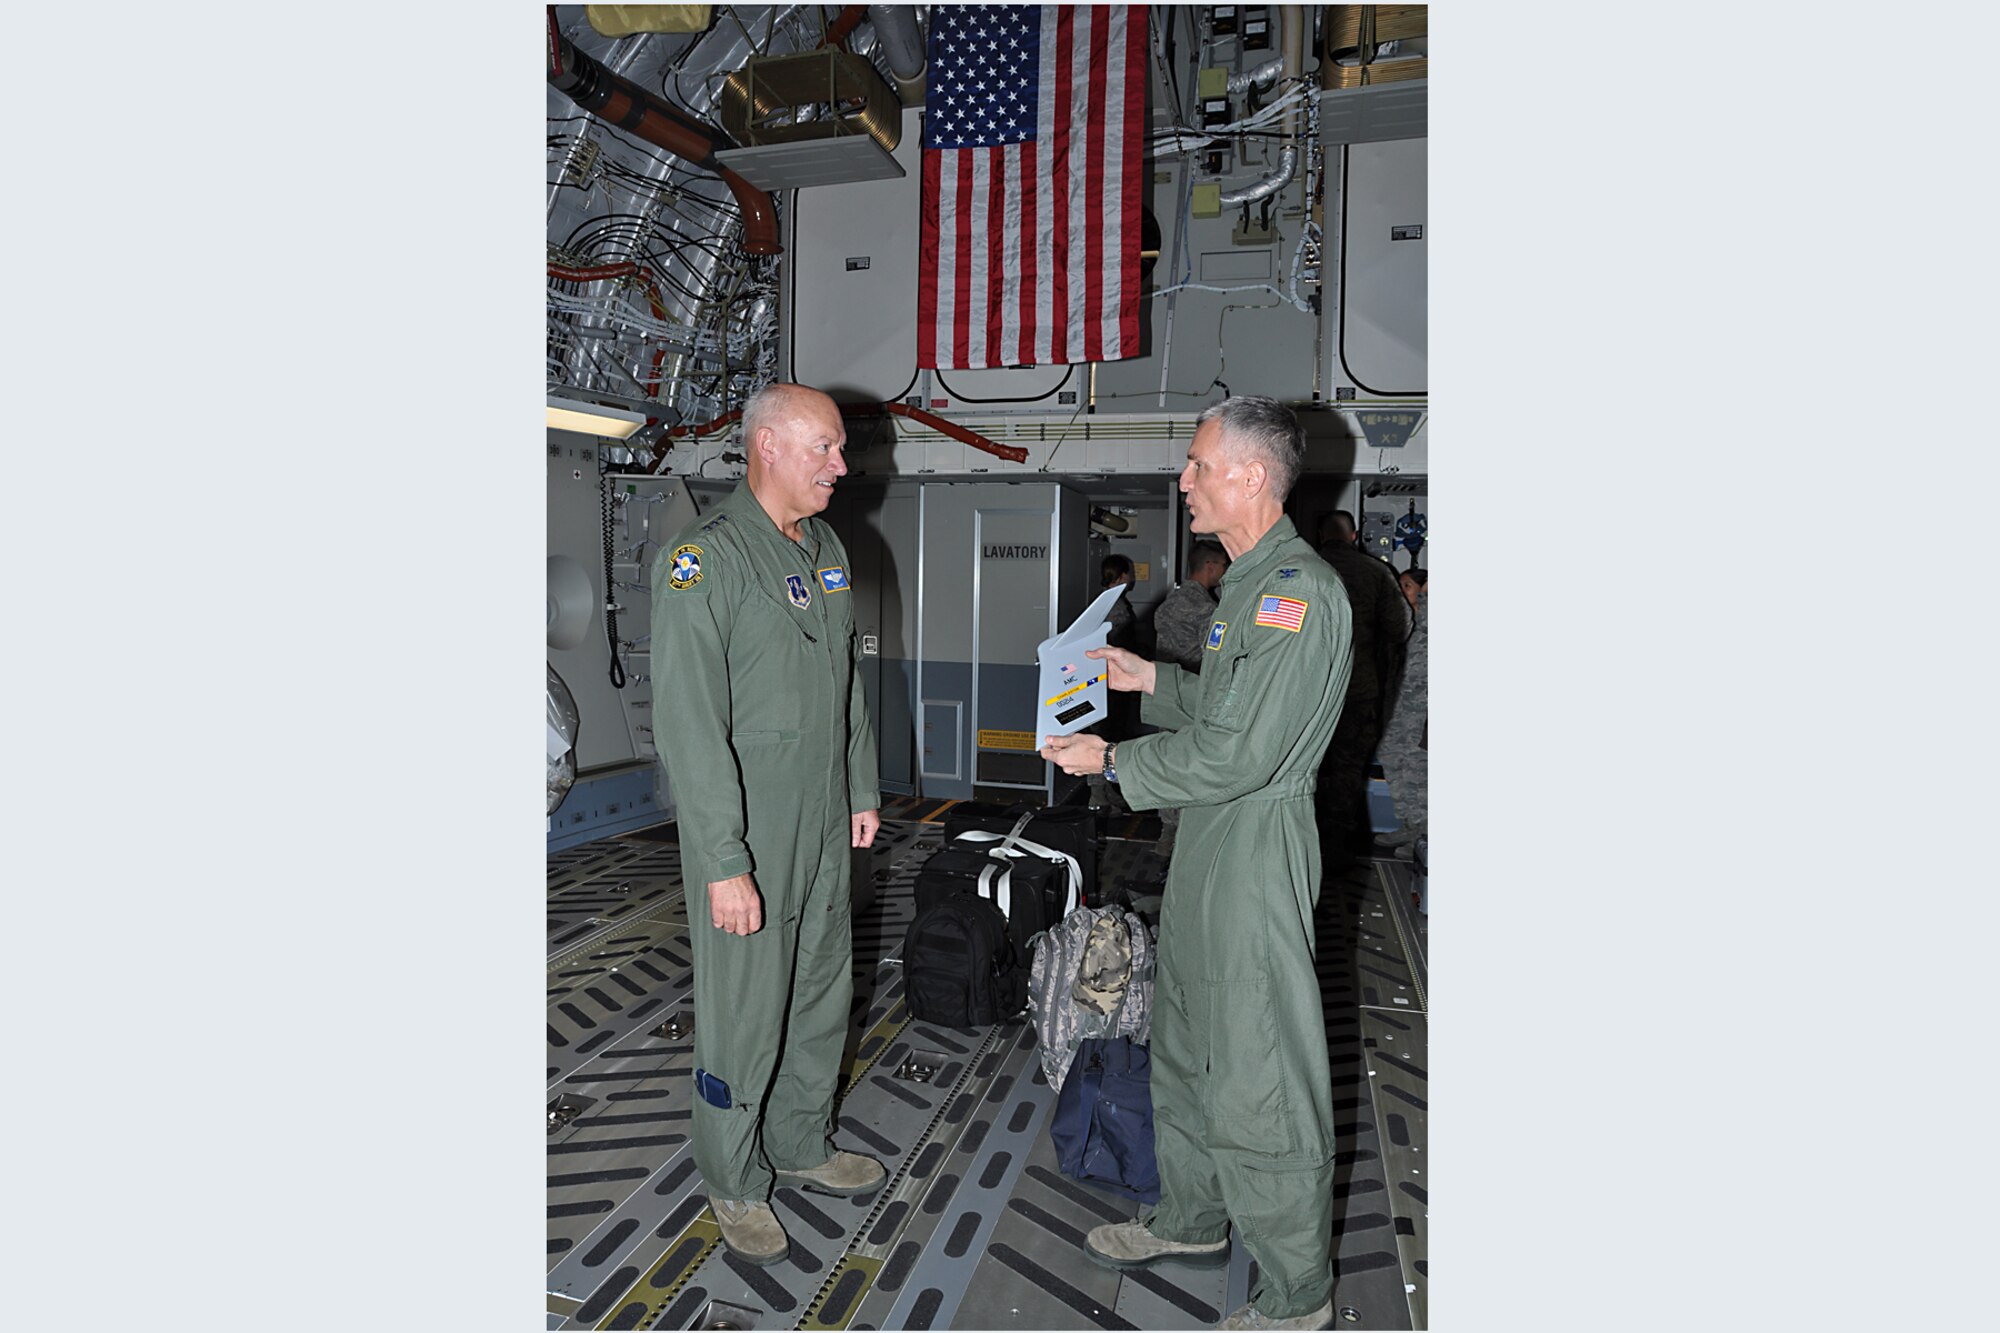 Col. Steven Chapman, 315th Airlift Wing commander, presents a commemorative T-tail to Lt. Gen. Harry M. Wyatt III, Air National Guard director, after the general flew with a crew from the 315th Airlift Wing in Joint Base Charleston's newest C-17 which arrived Dec. 9, 2011. (U.S. Air Force Photo by Michael Dukes)